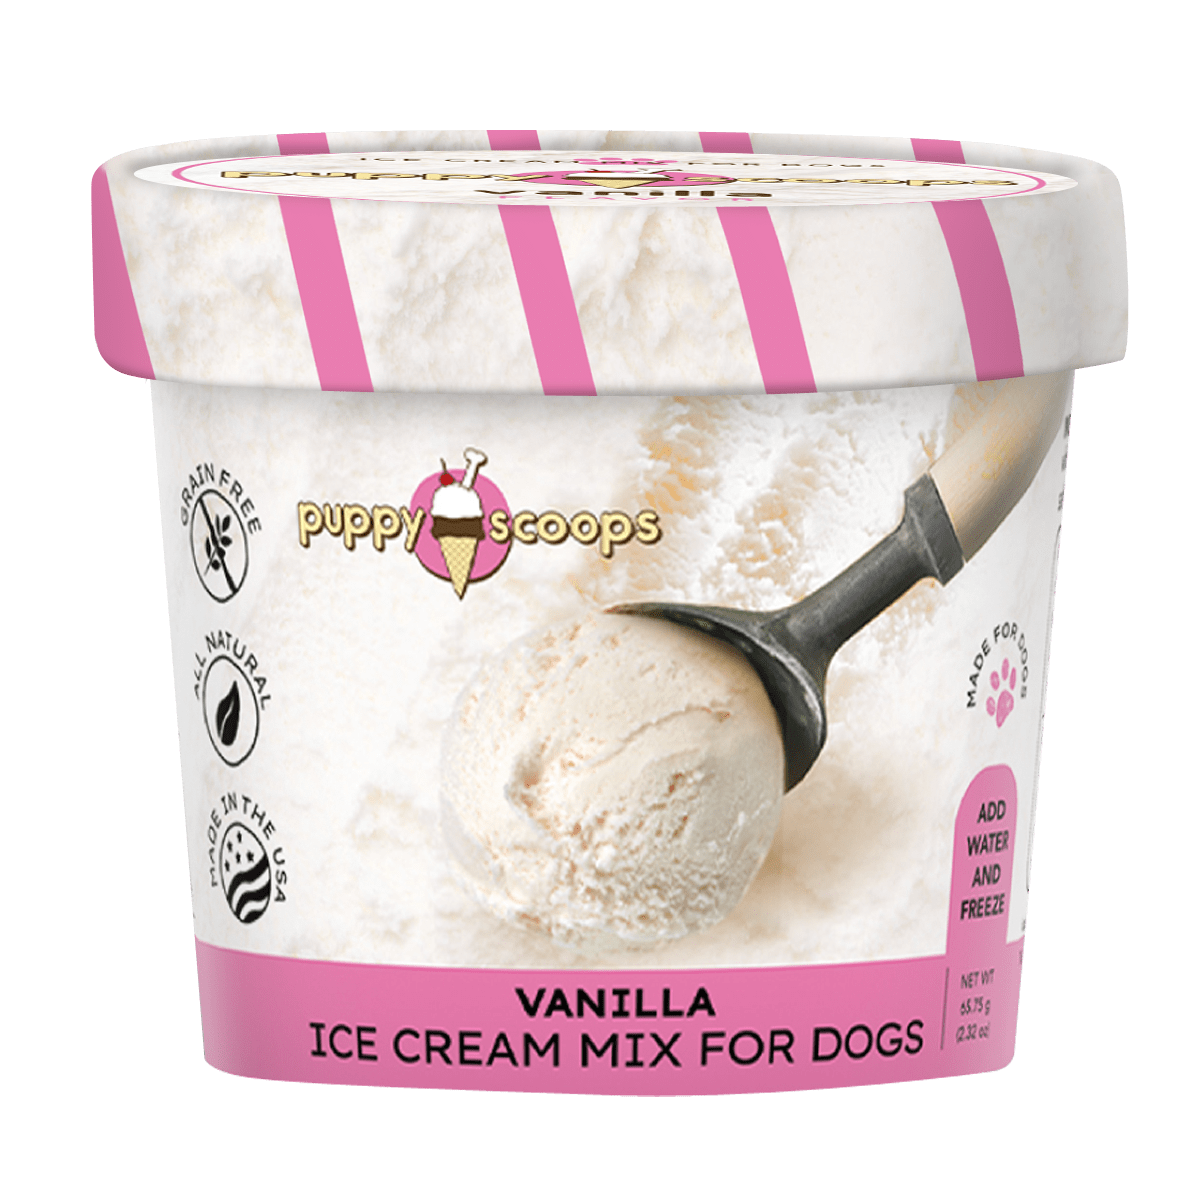 http://puppycake.com/Shared/Images/Product/Puppy-Scoops-Ice-Cream-Mix-Vanilla-Cup-Size-2-32-oz/656832_VANILLA_Mockup-3D-versions-of-new-sizes-Puppy-Scoops_4x4inch_v1_022120-min.png